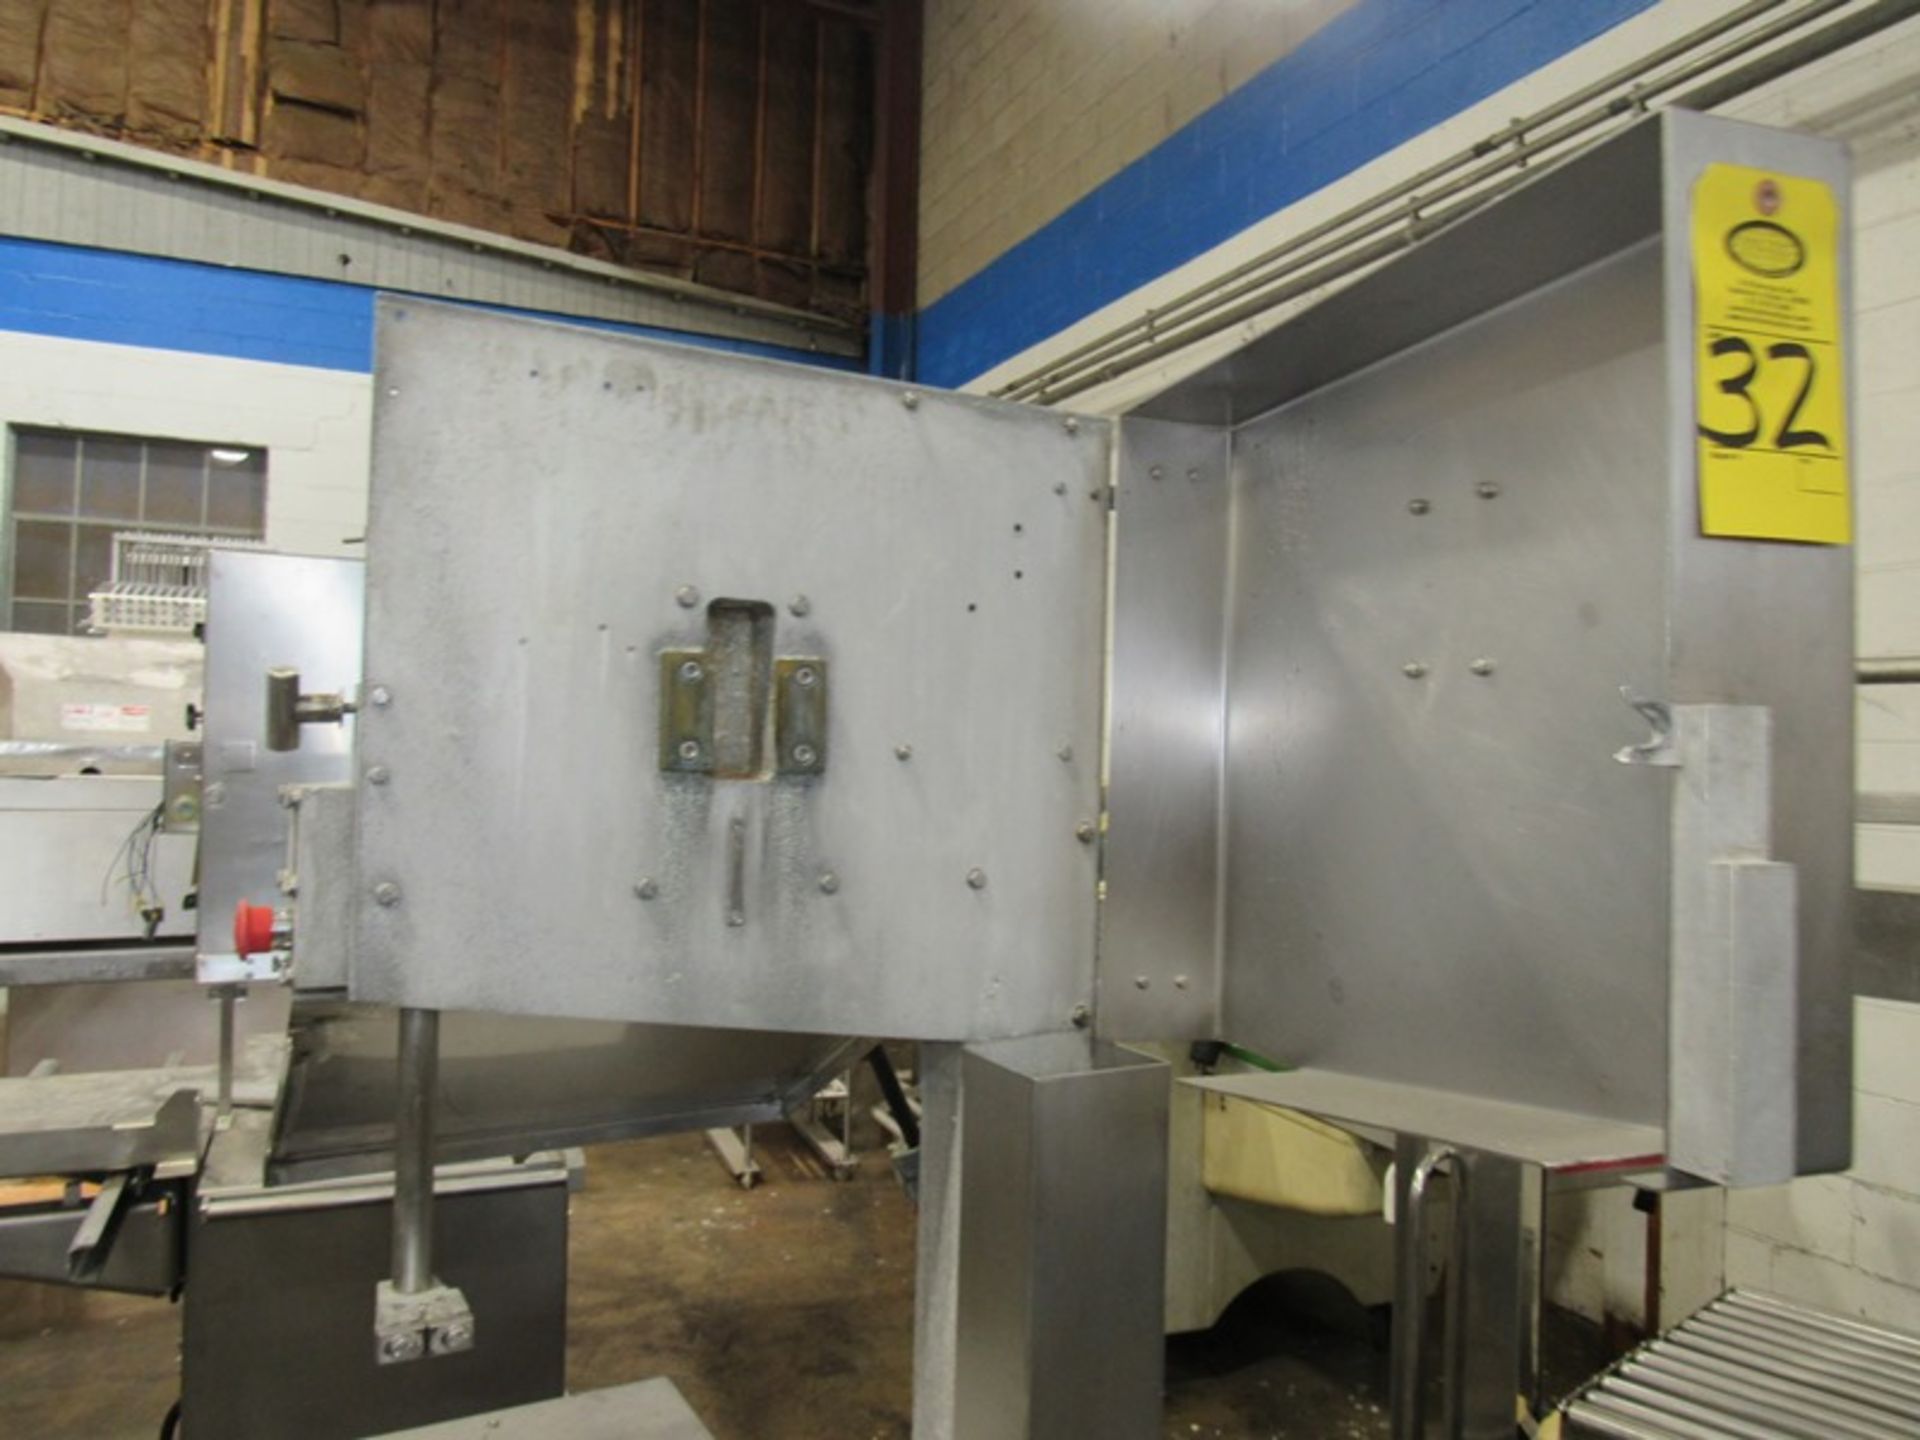 AEW Mdl. 400 Band Saw, aluminum frame, missing top blade guide, wheel has been modified with - Image 5 of 7